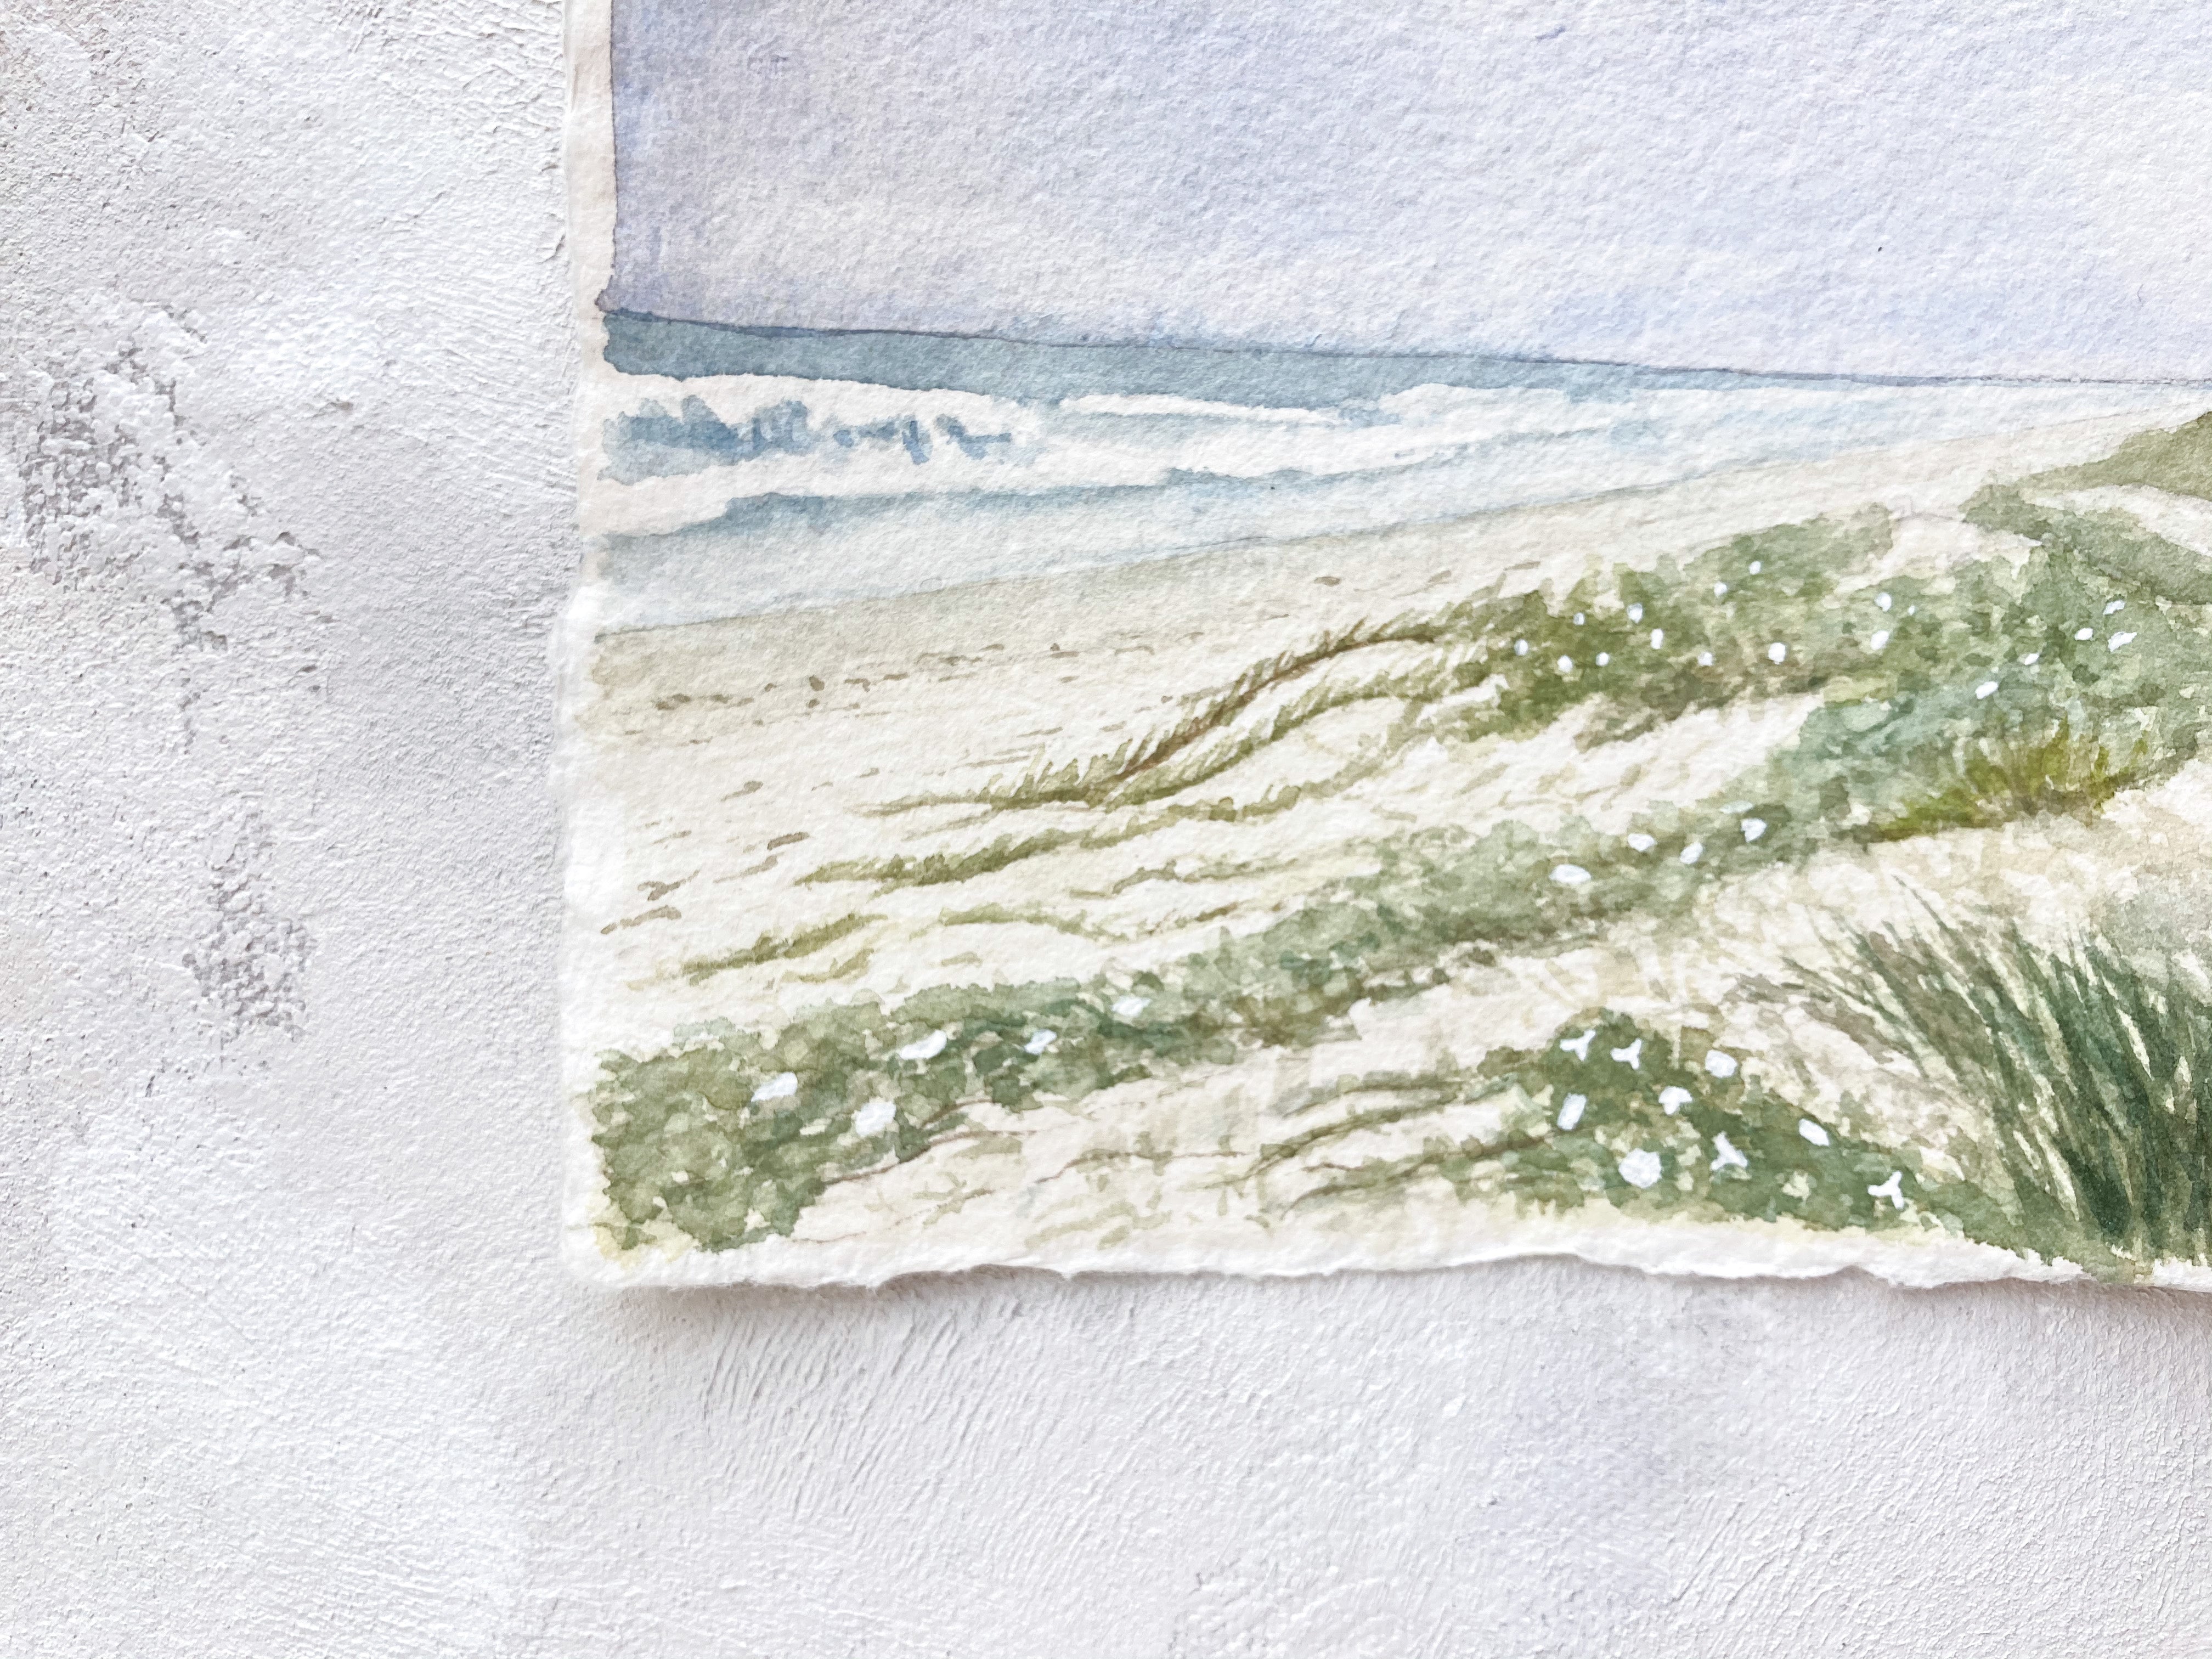 5x7 original watercolor of flower covered sand dunes, on handmade deckled-edge paper, detail